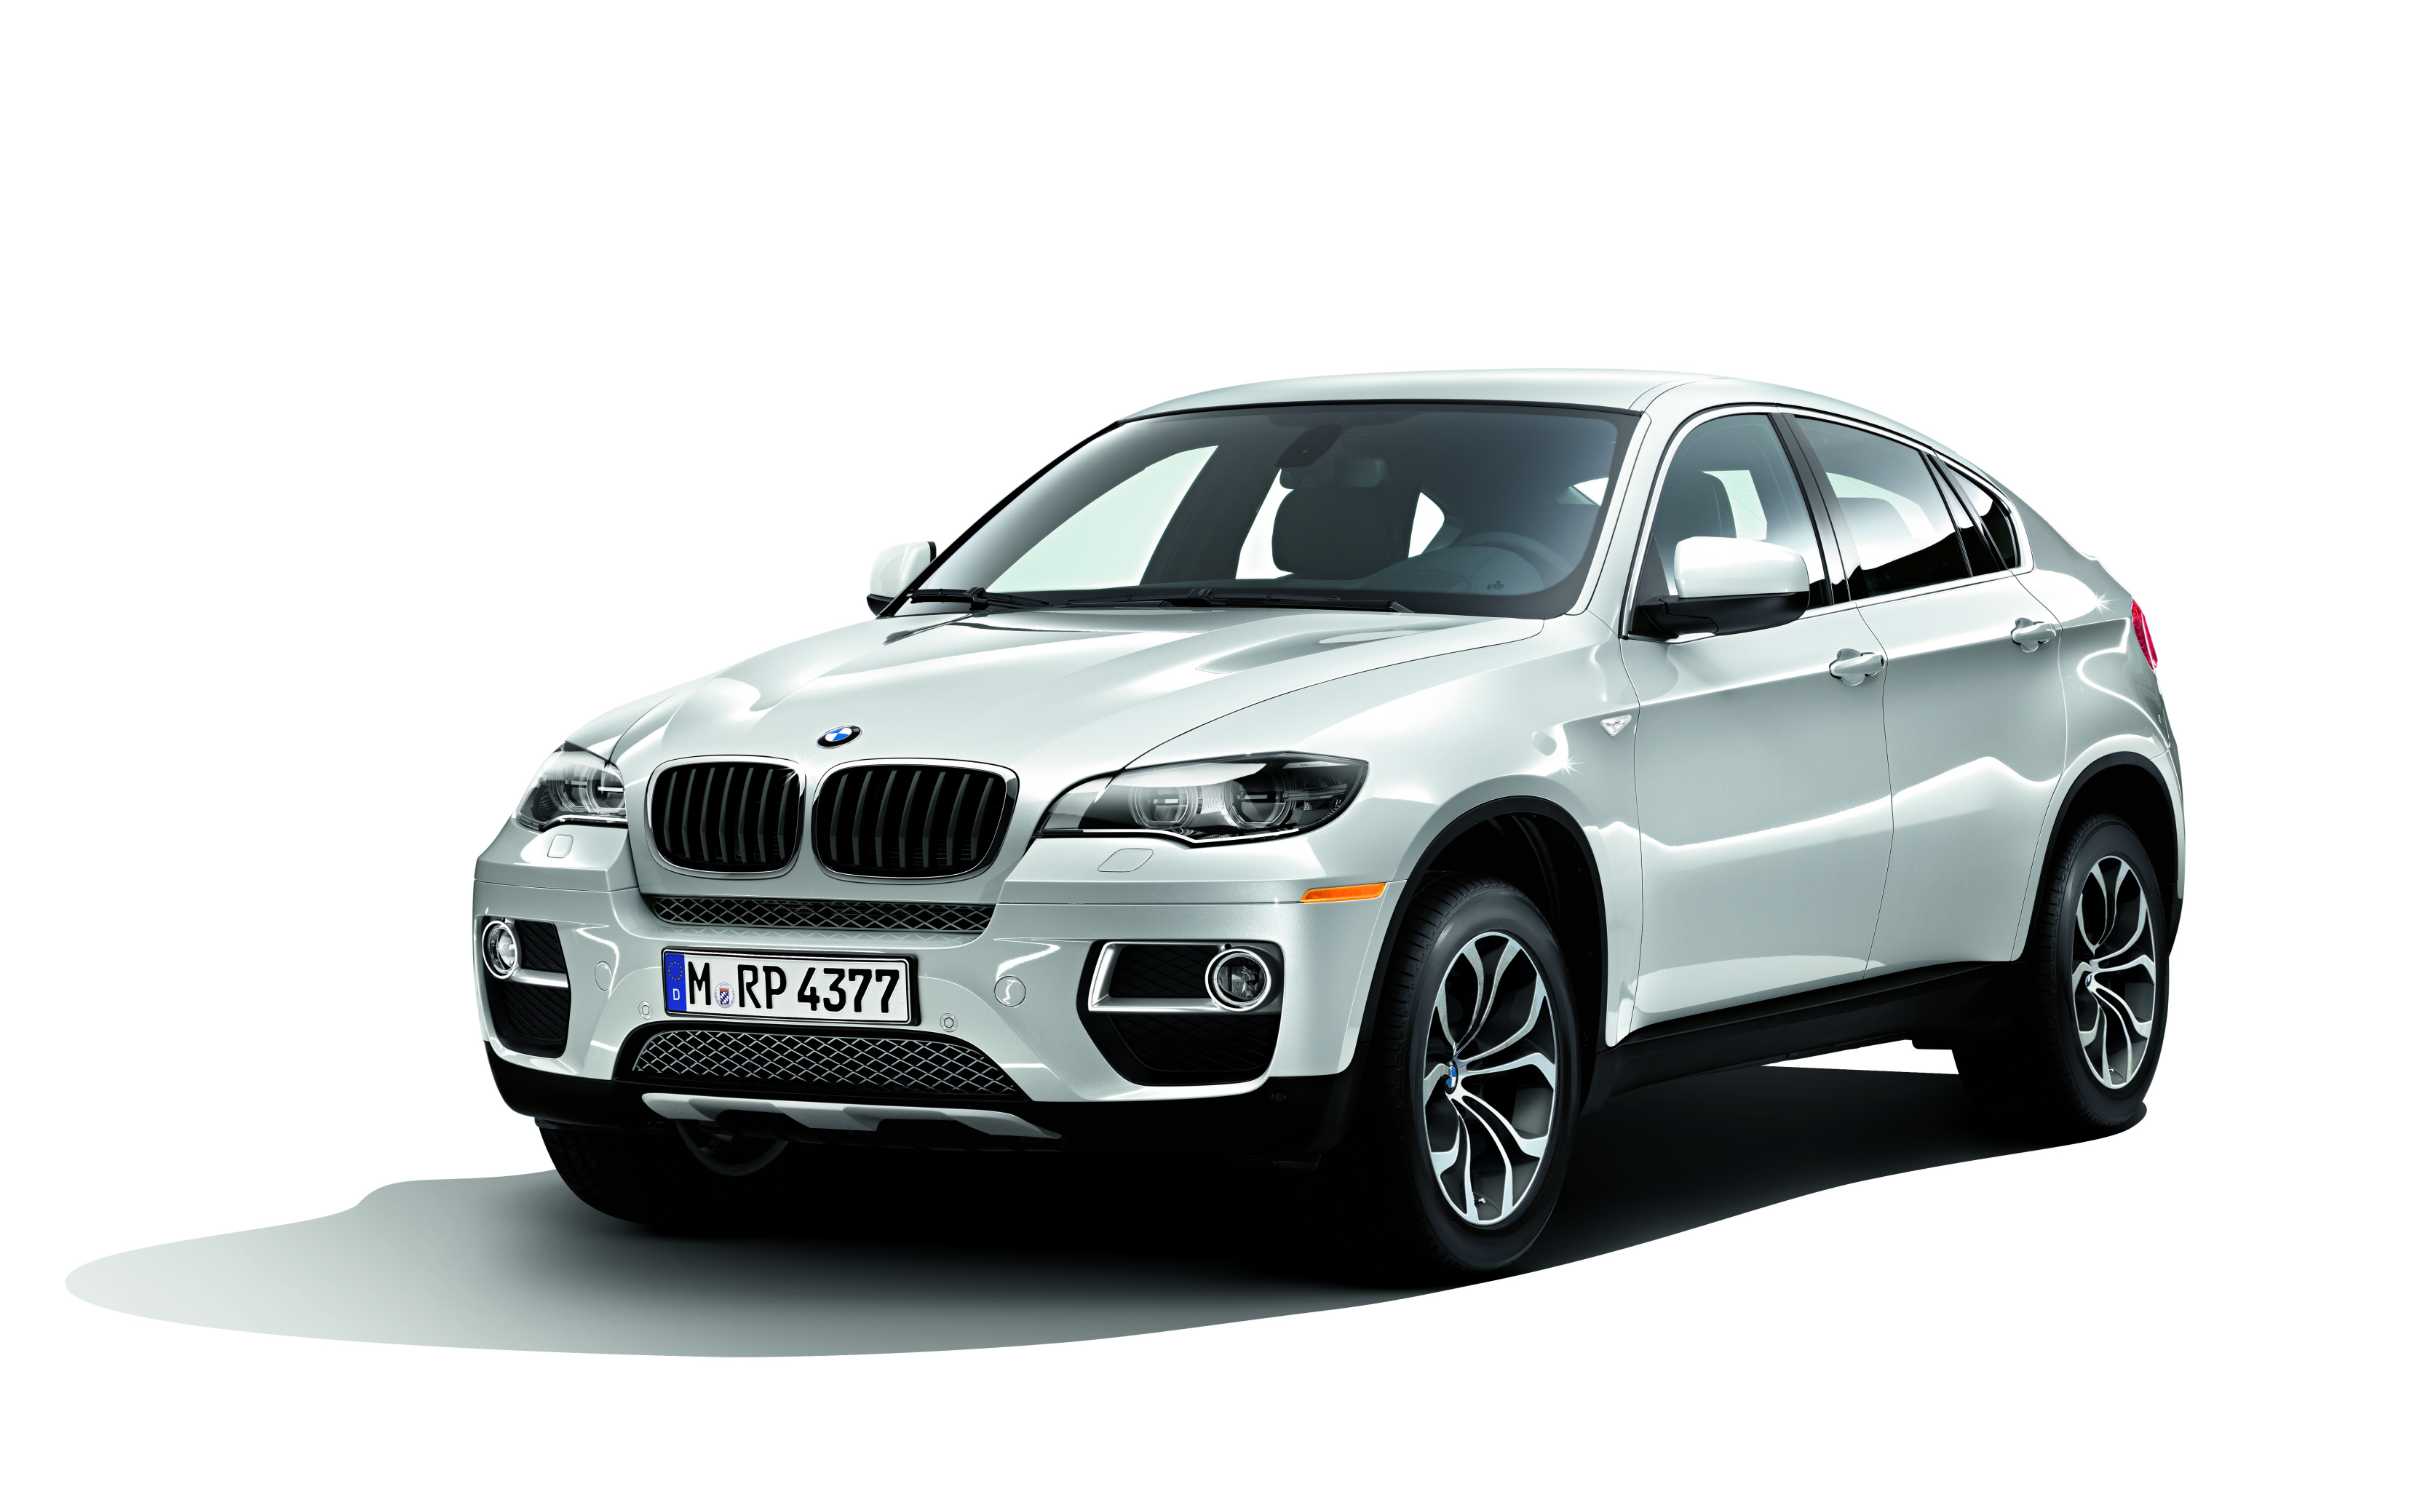 2013 BMW Individual X6 Performance Edition 6 Series Frozen Silver Edition Coupe.